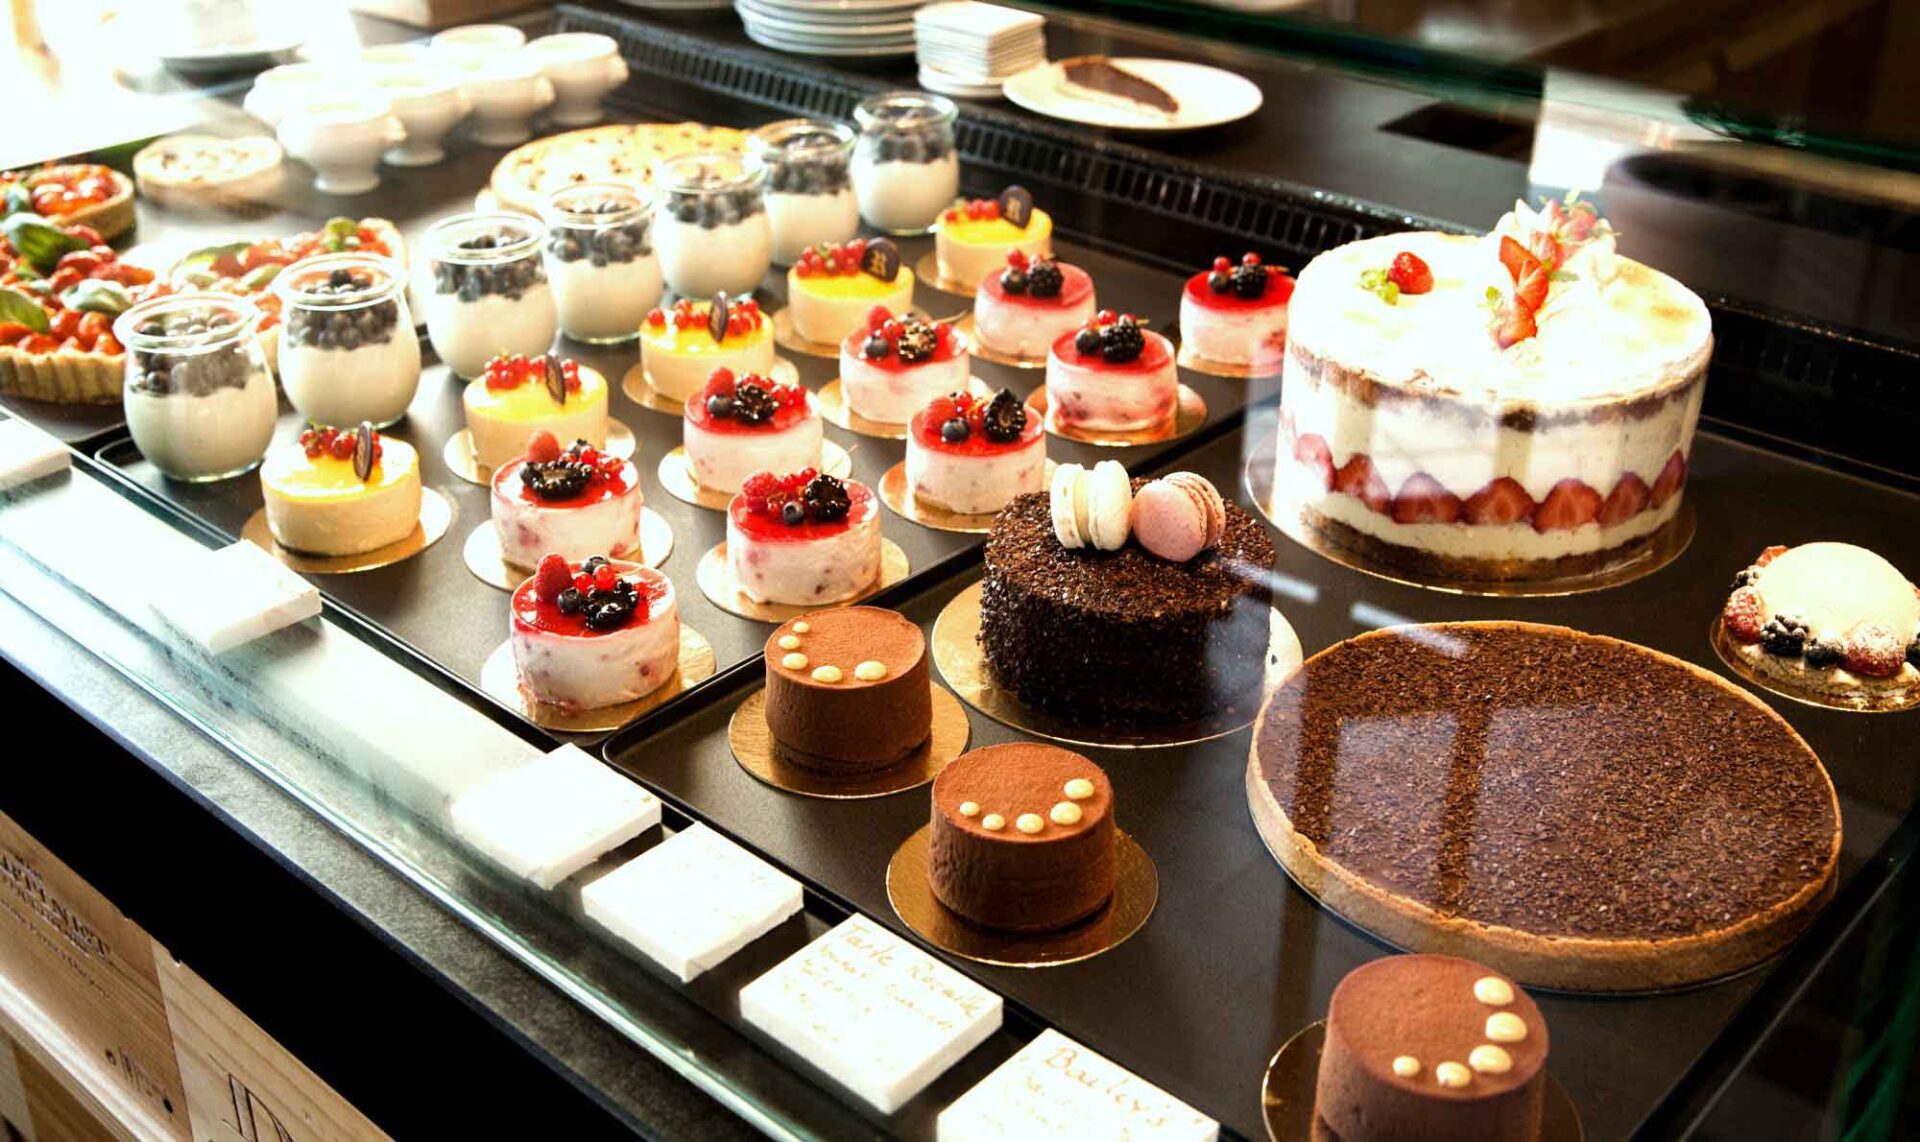 patisserie-rocaille-scaled.jpg